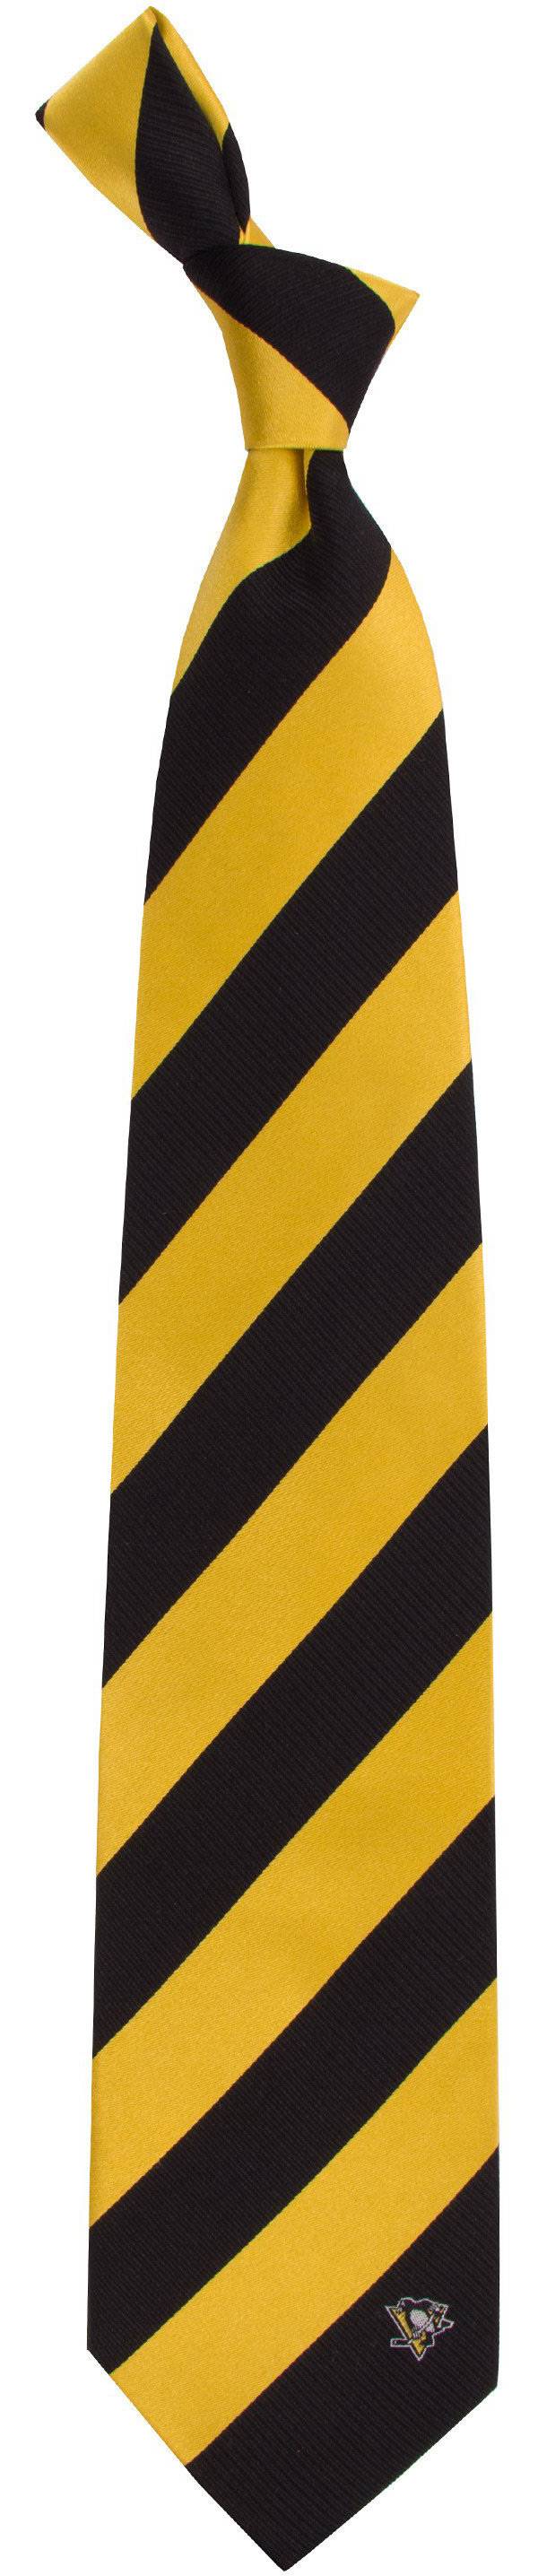 Eagles Wings Pittsburgh Penguins Woven Silk Necktie product image